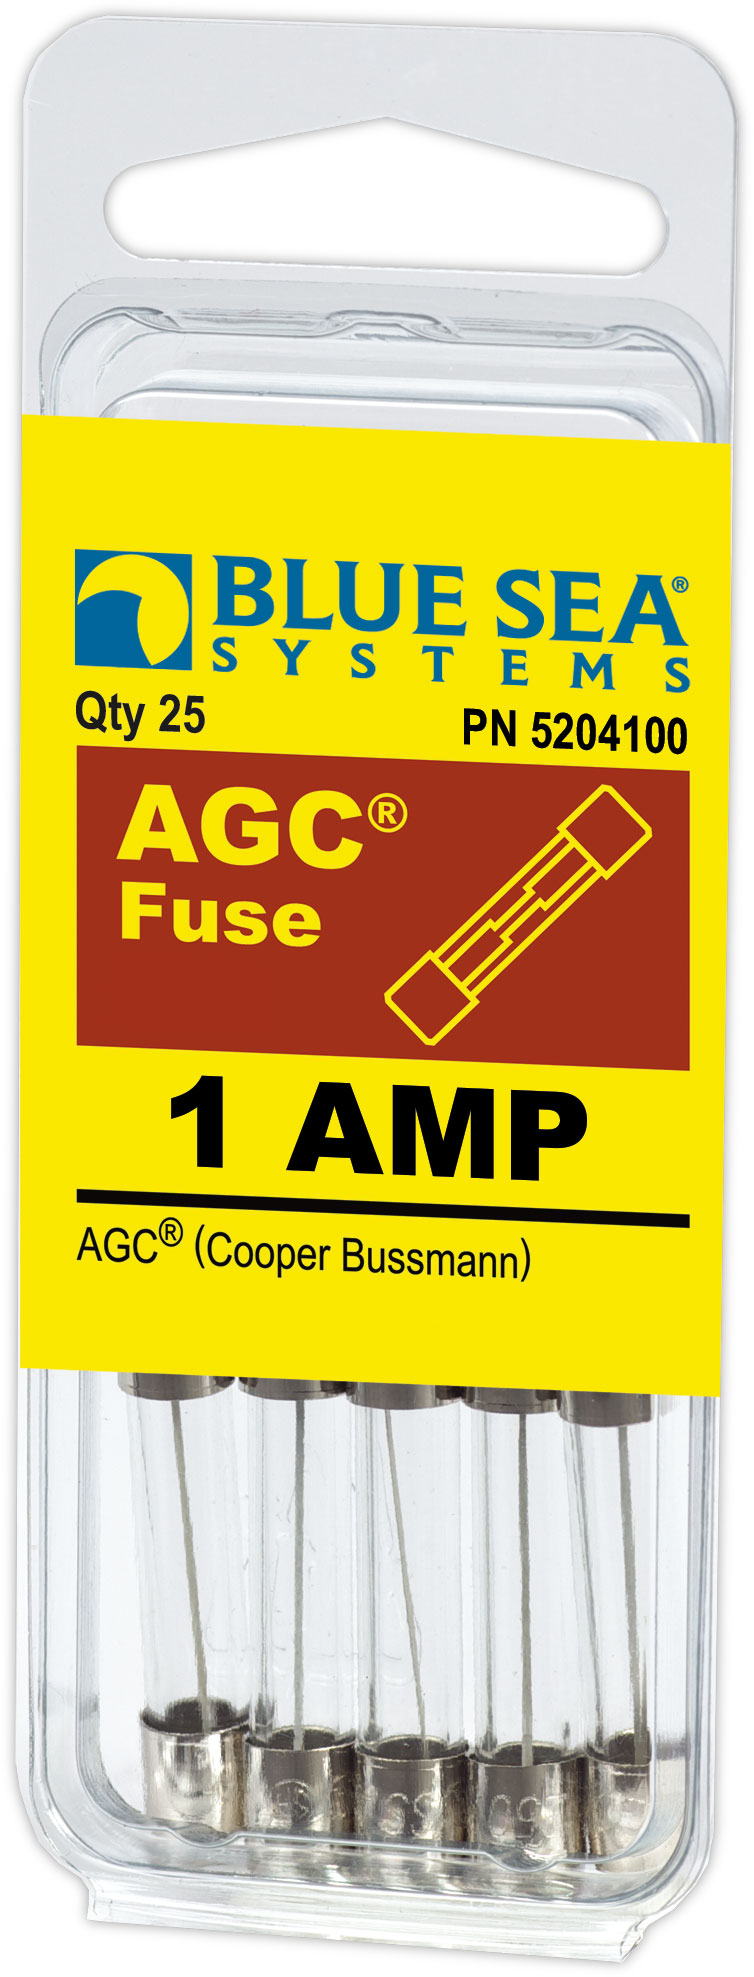 Part # 5204100  Manufacturer Blue Sea Systems  Product Type Fuse